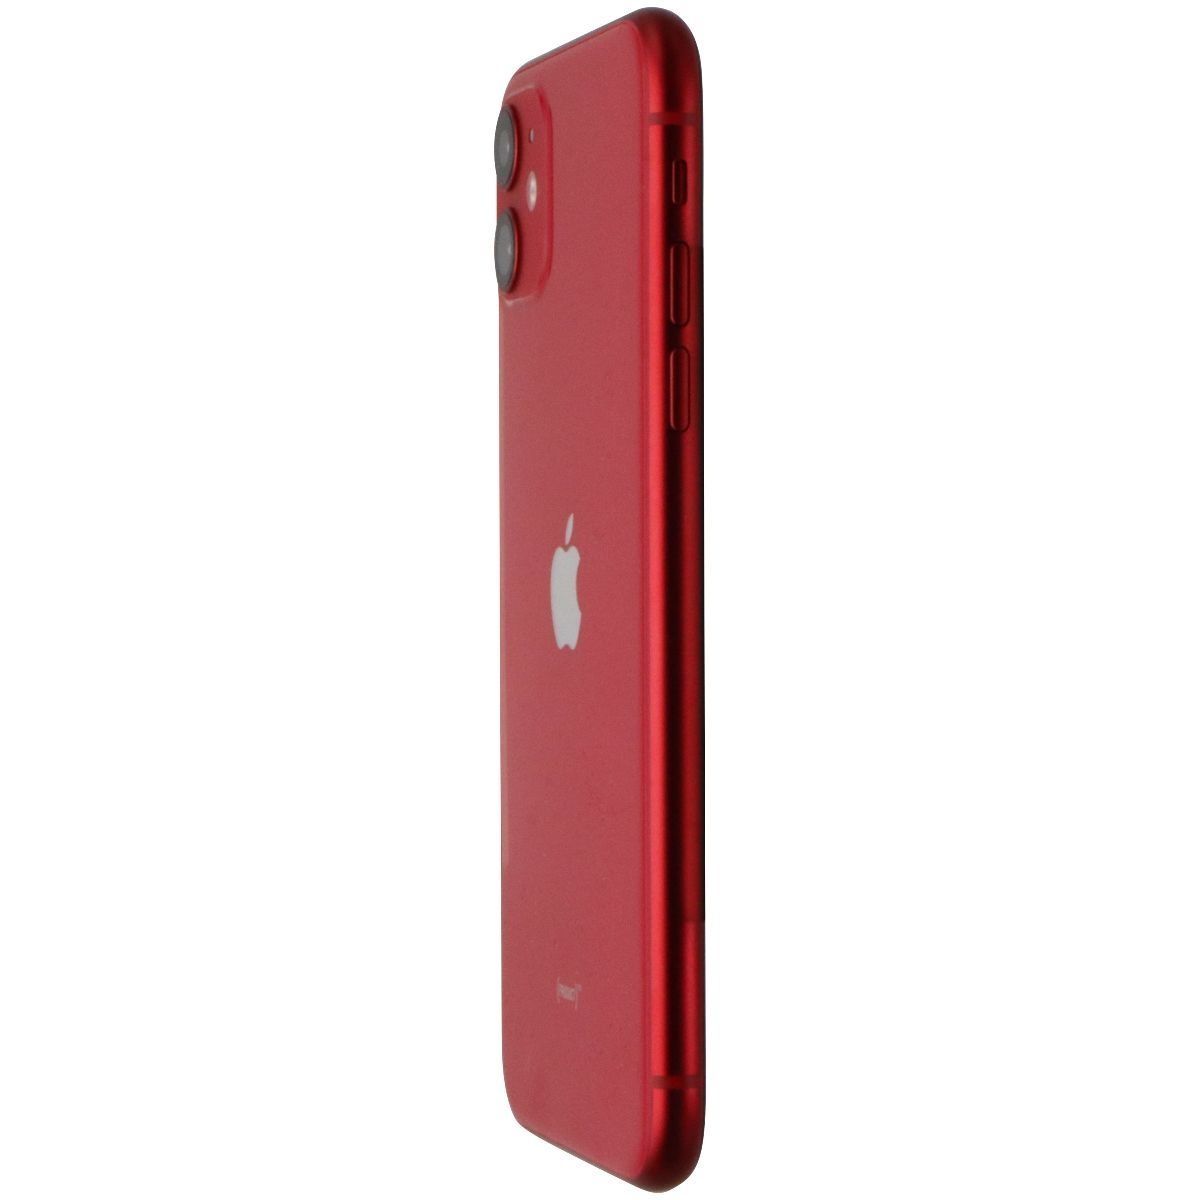 Apple iPhone 11 (6.1-inch) Smartphone (A2111) Unlocked - 128GB / Product (RED)